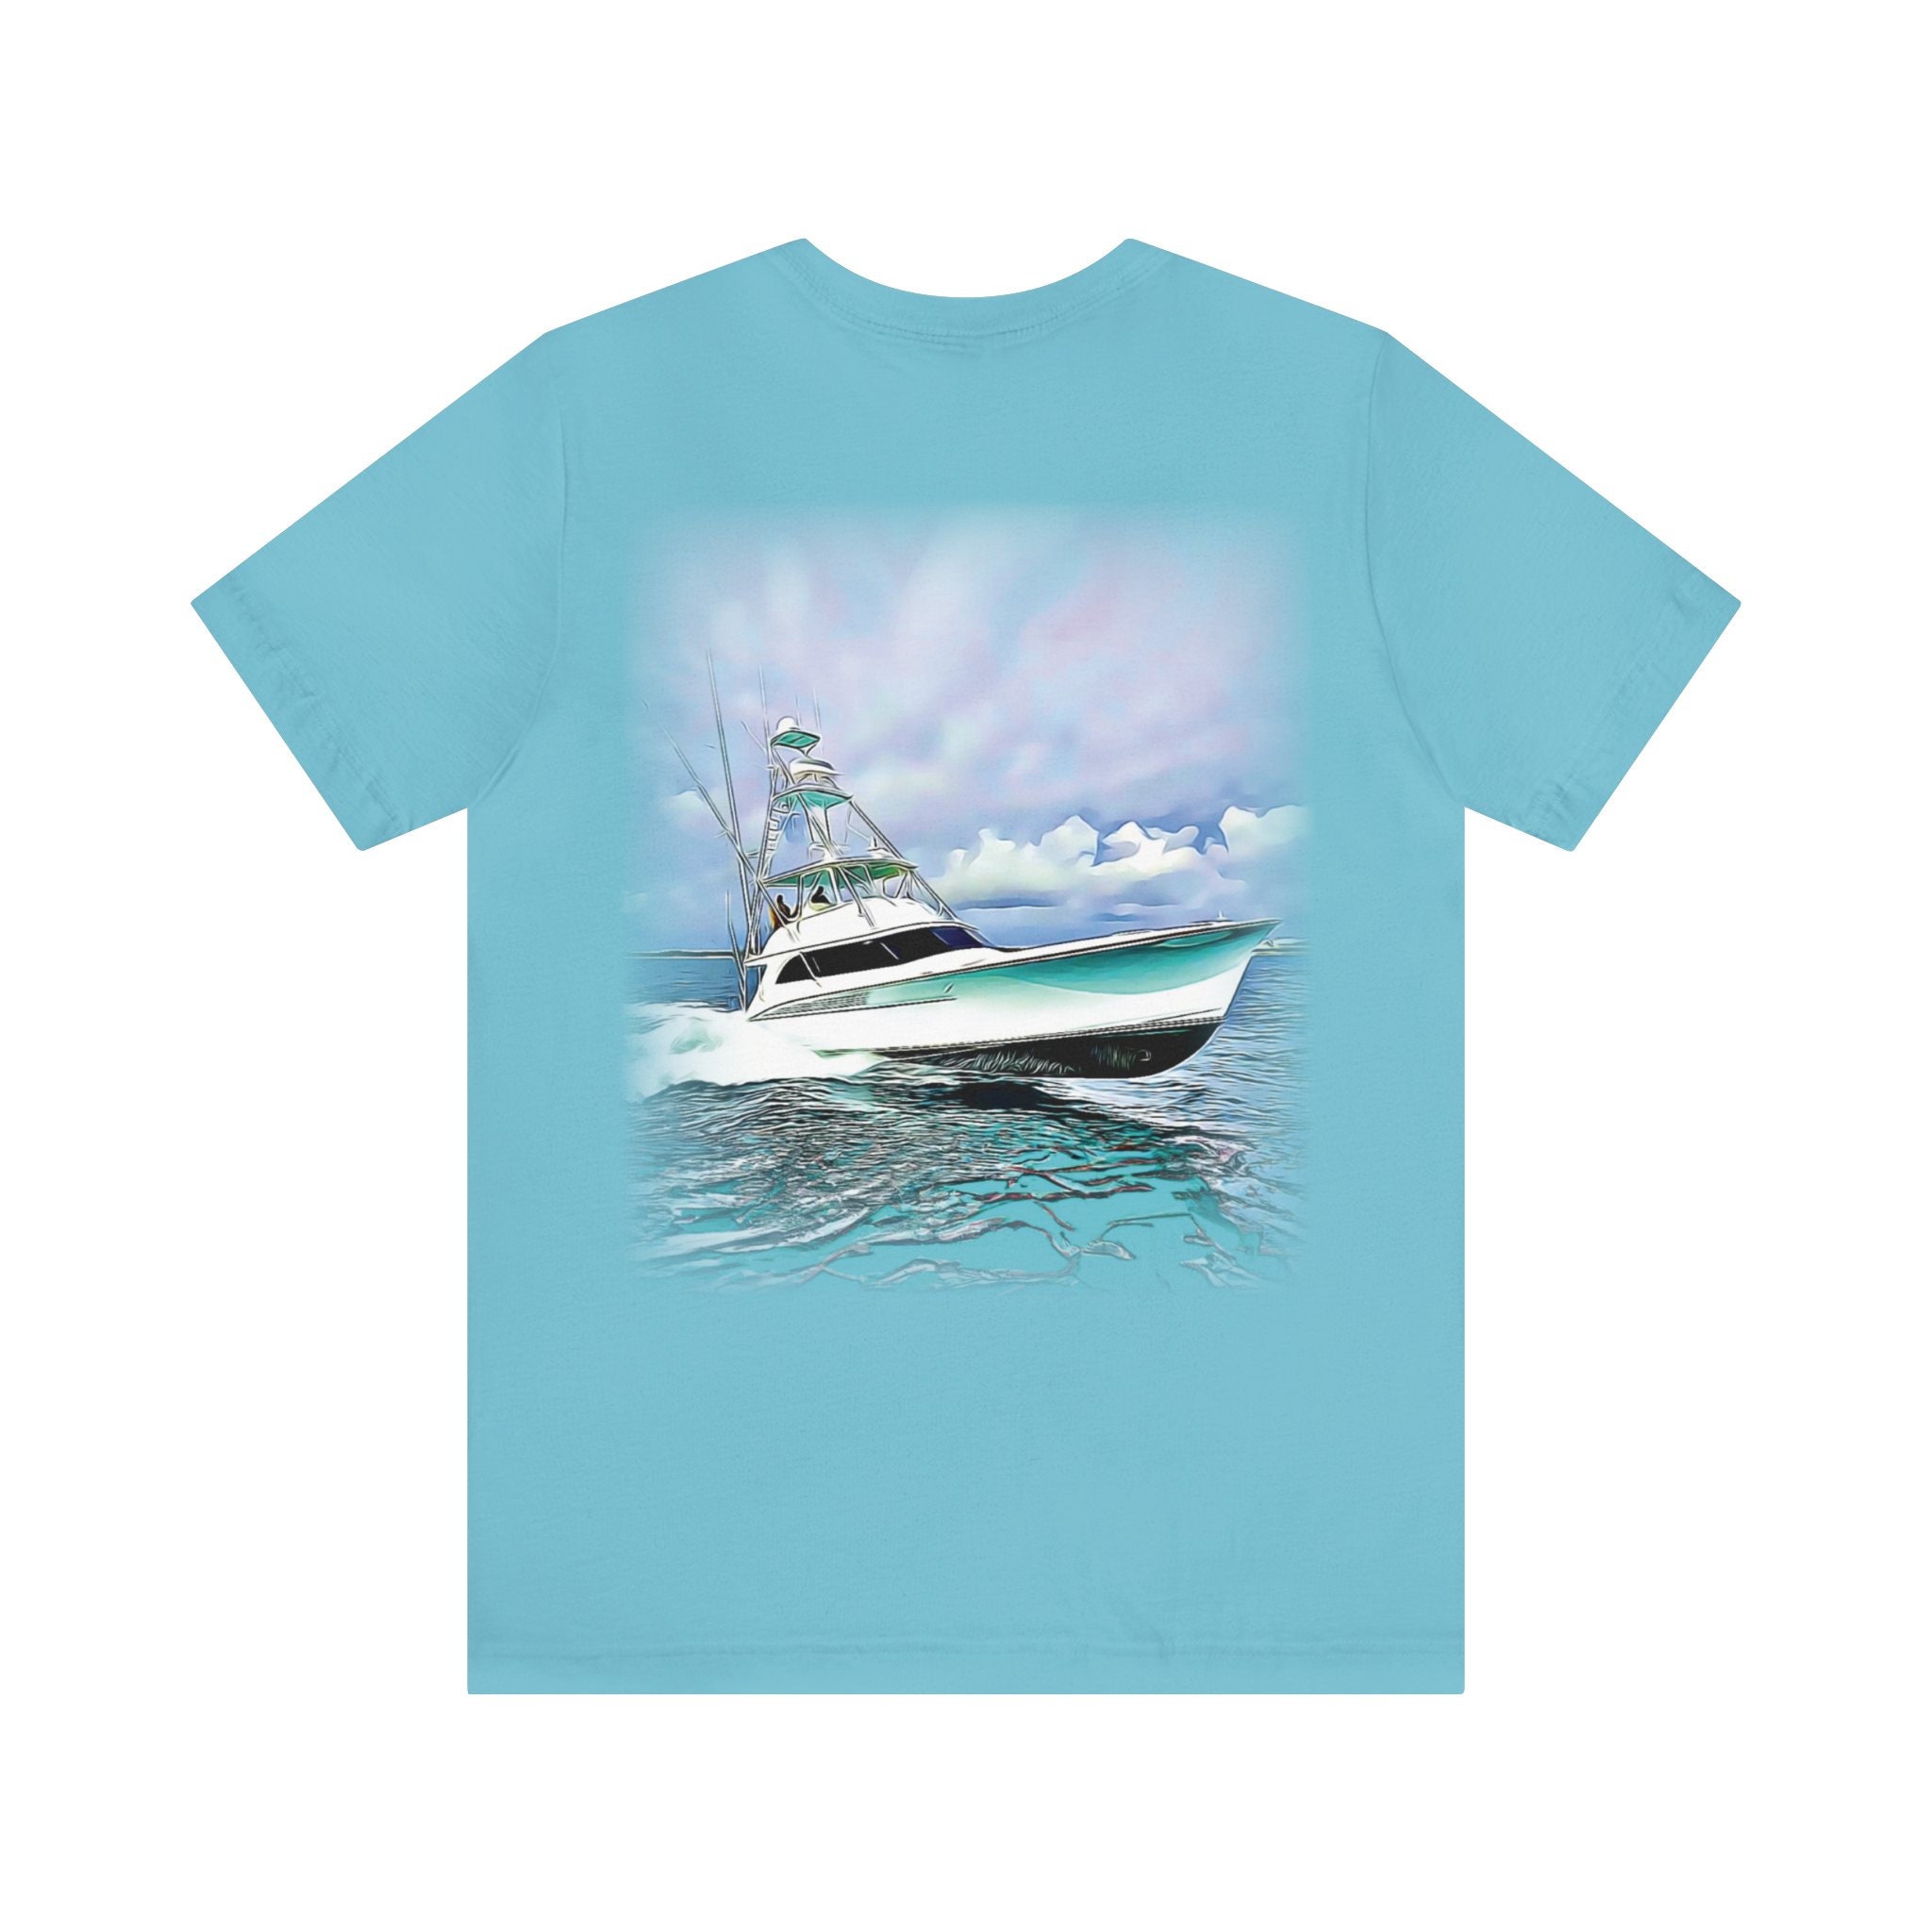 Sportfishing Yacht T-Shirt | Nautical T-Shirt for Anglers & Boaters | Perfect Gift for The Fisherman or Boat Lover in Your Life